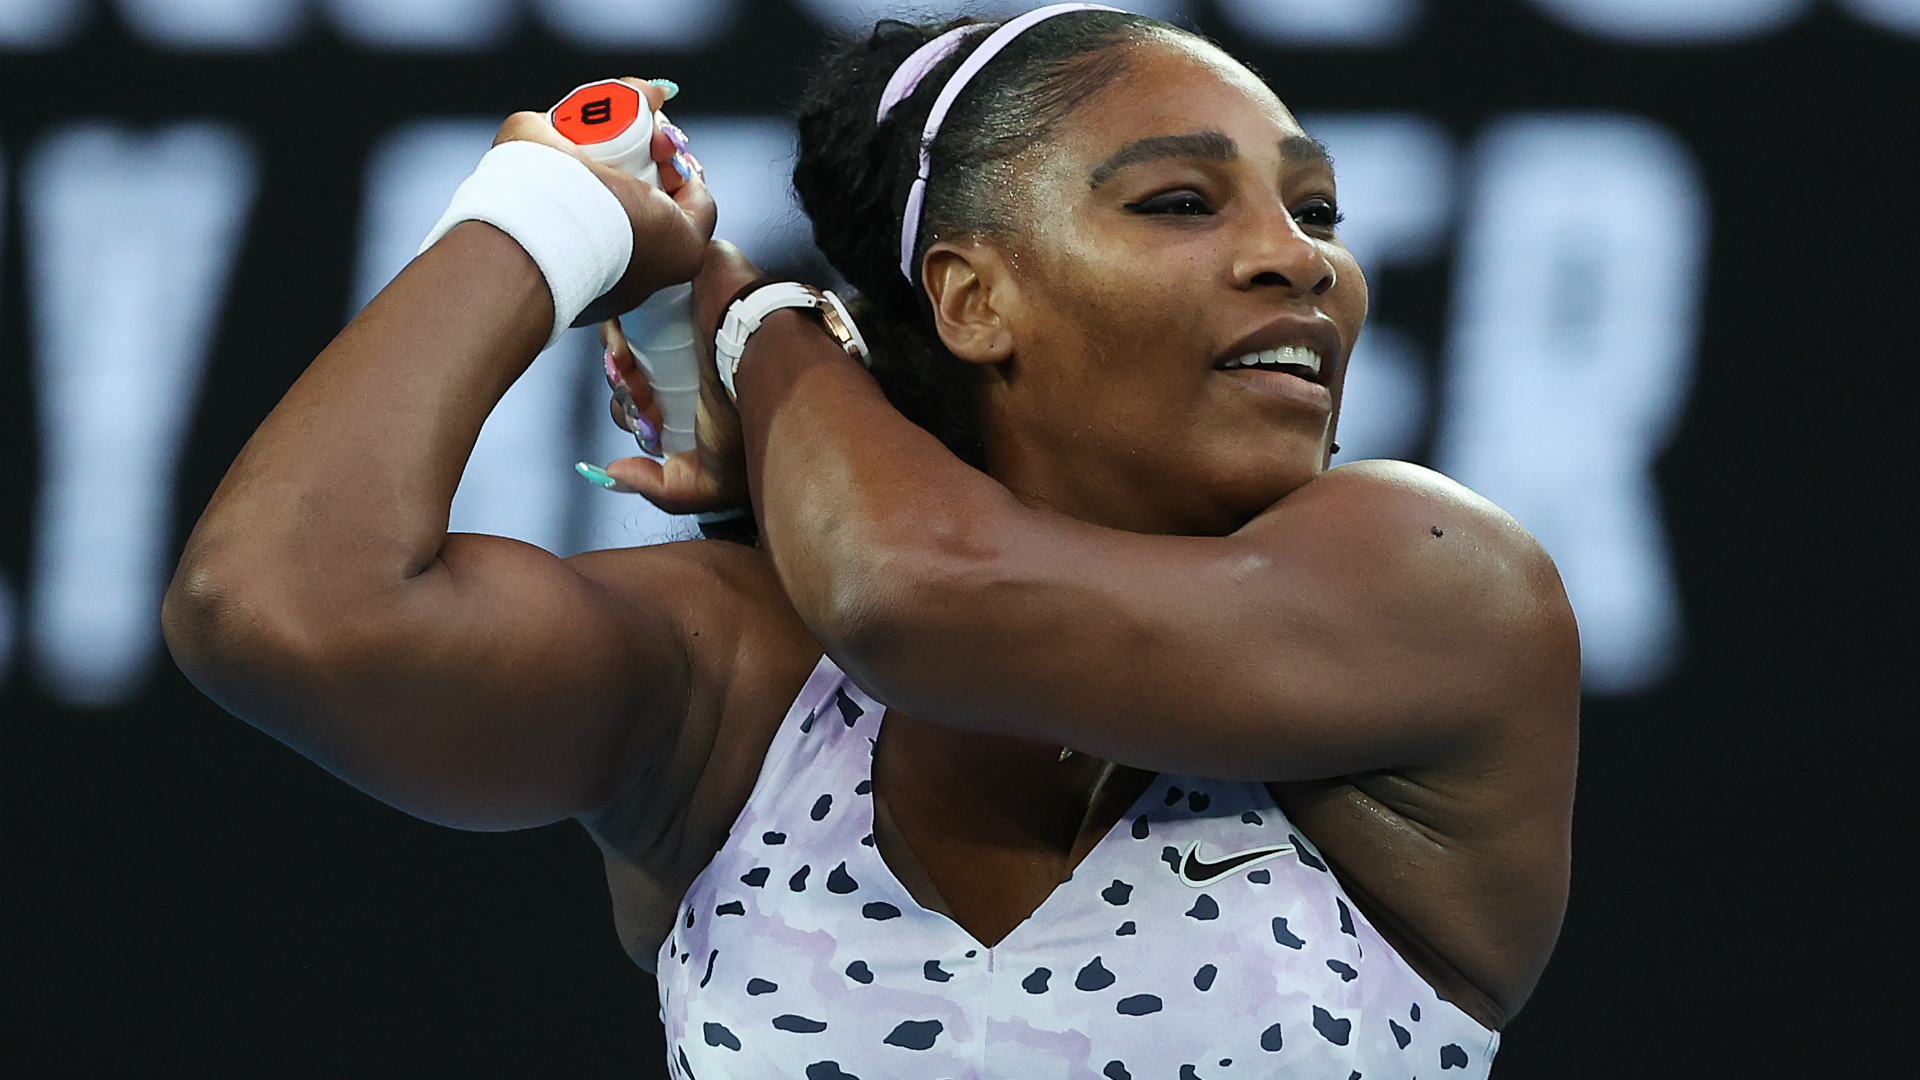 Australian Open 2020 Serena Williams Results And Form Ahead Of Third Round Match With Qiang